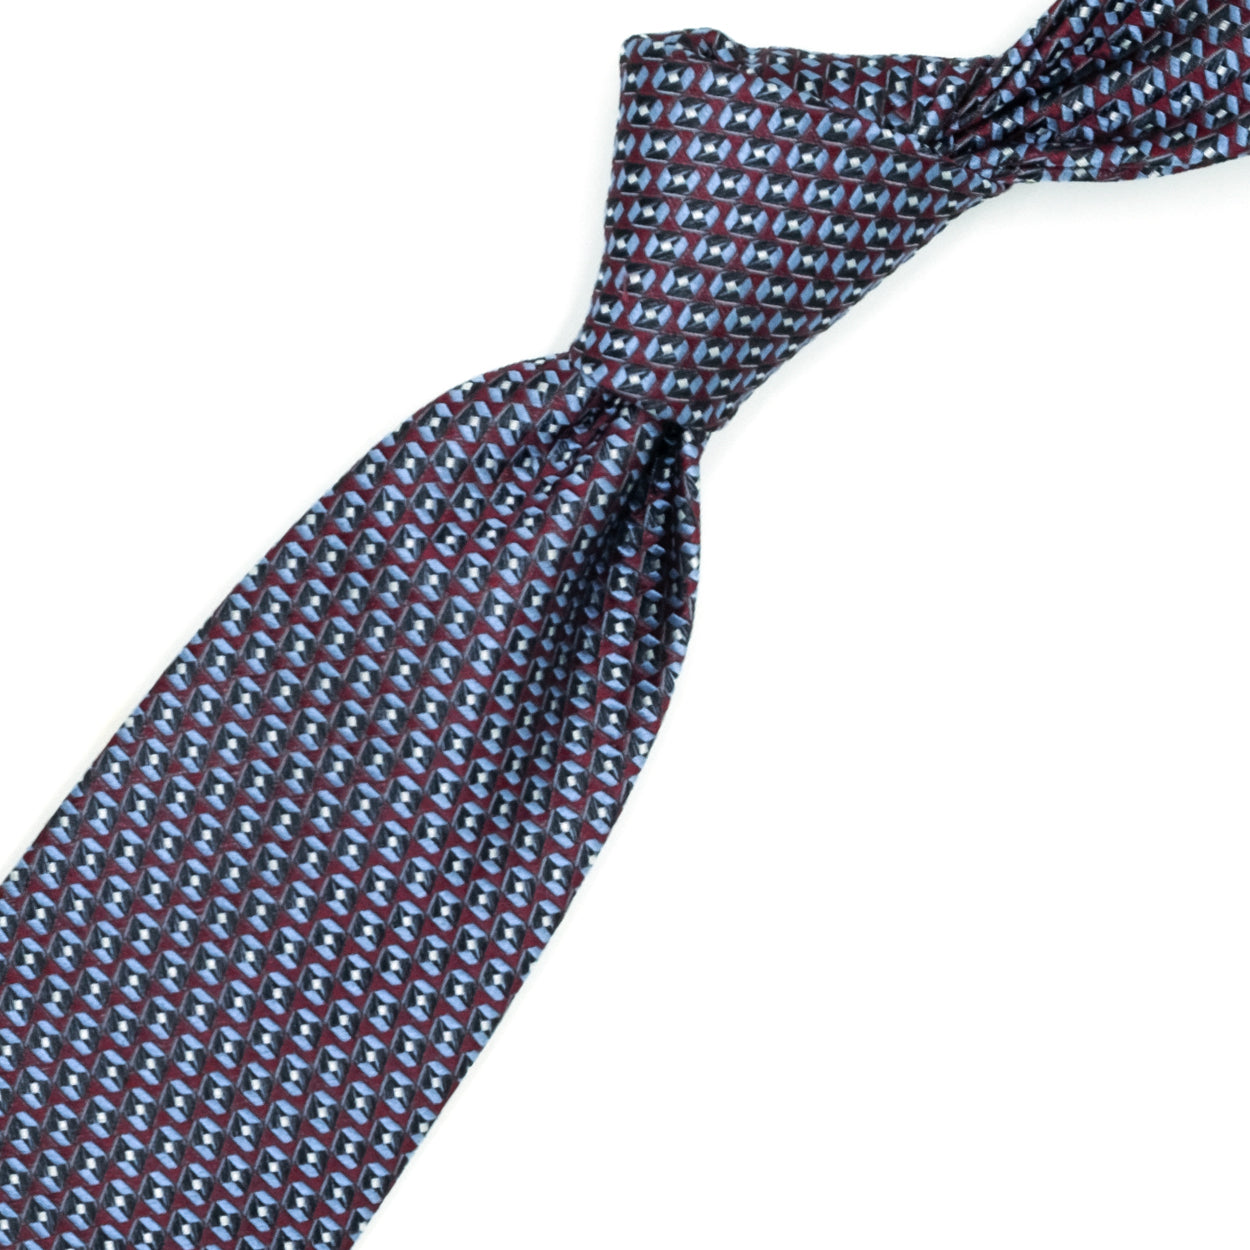 Bordeaux tie with blue, light blue and white geometric pattern